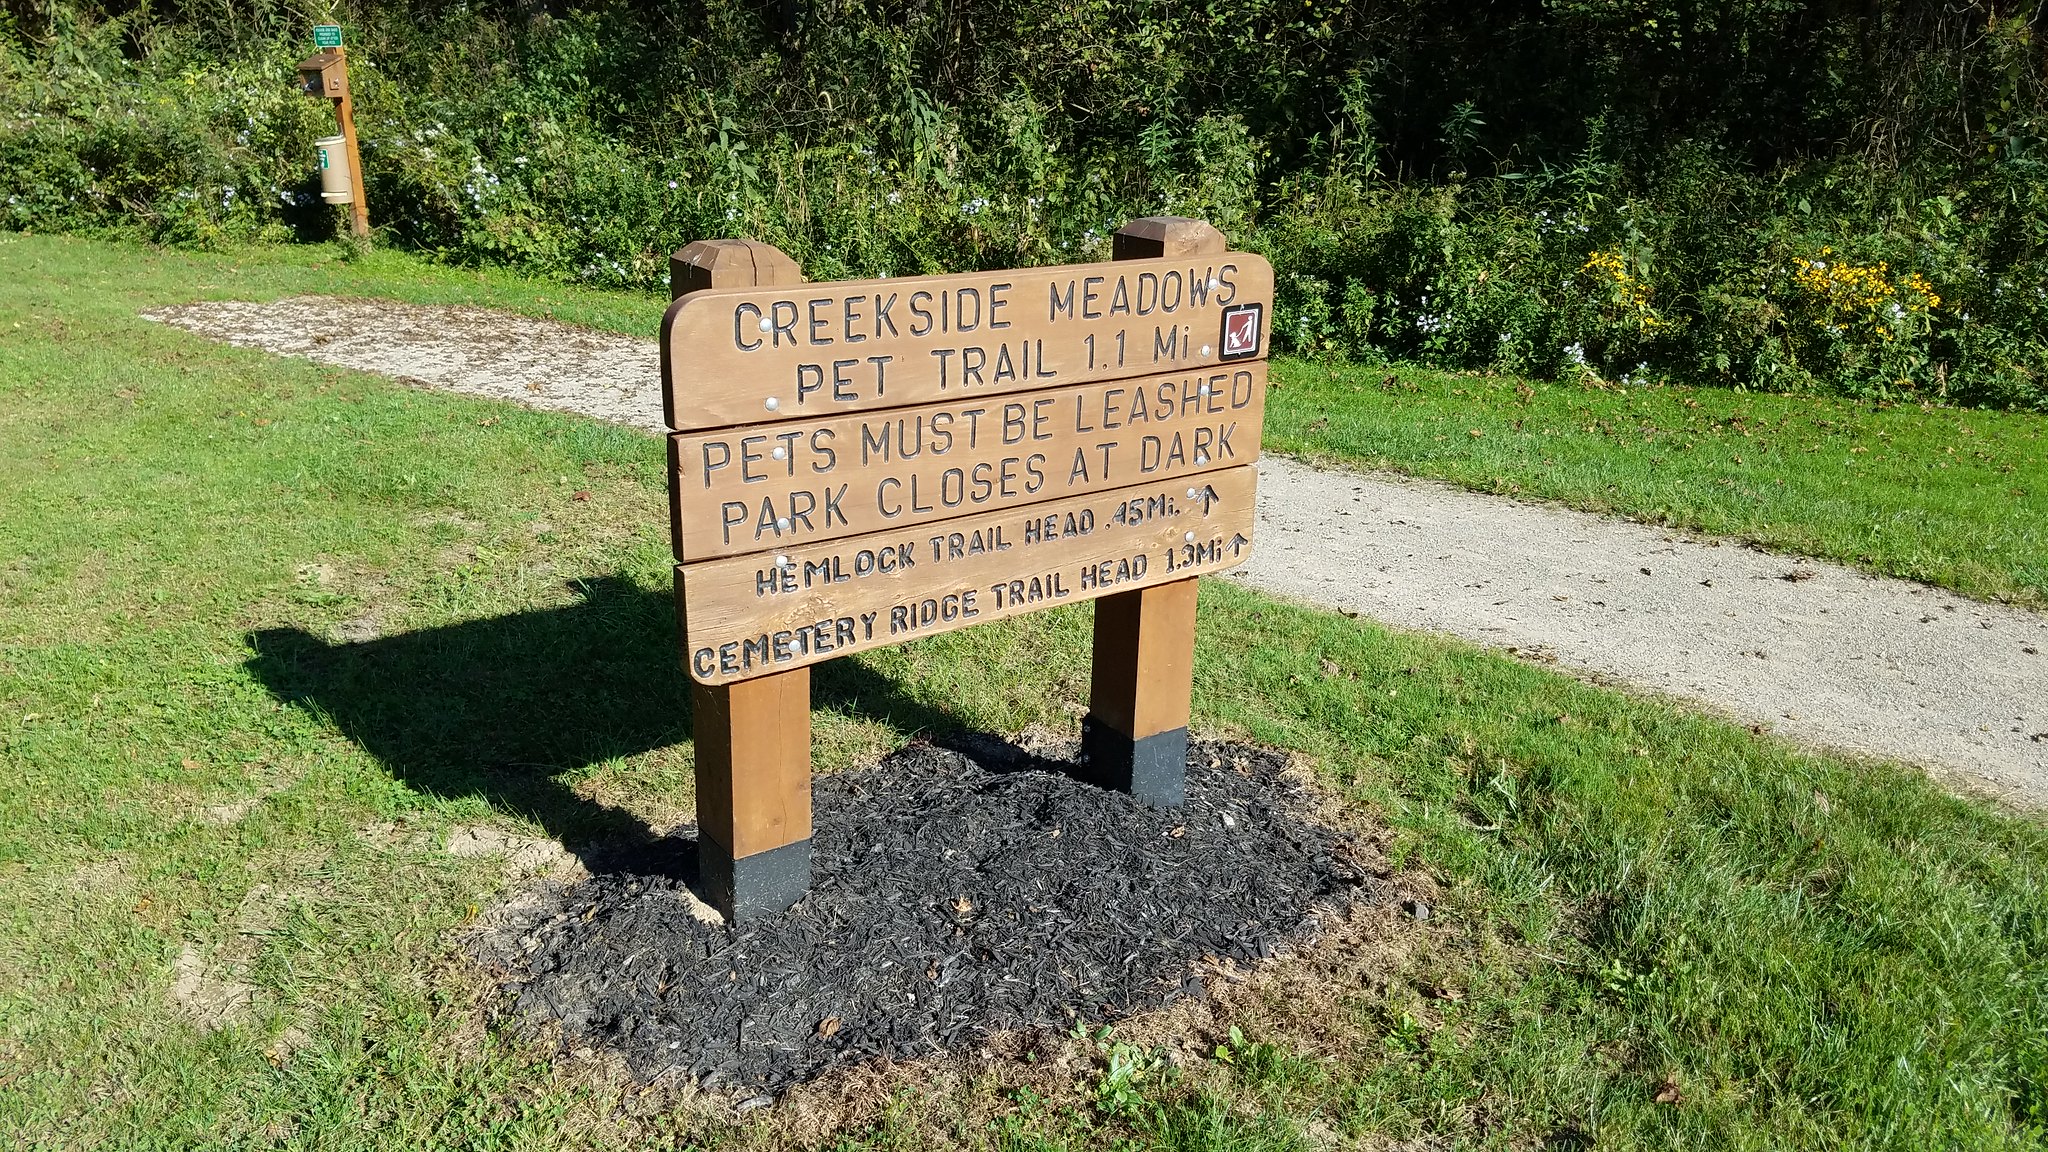 horizontal photo showing a trails sign in clear creek metro park, listing creekside meadows pet trail, hemlock trail and cemetery ridge trail. A wooden sign on a grassy area with plants and trees in the background